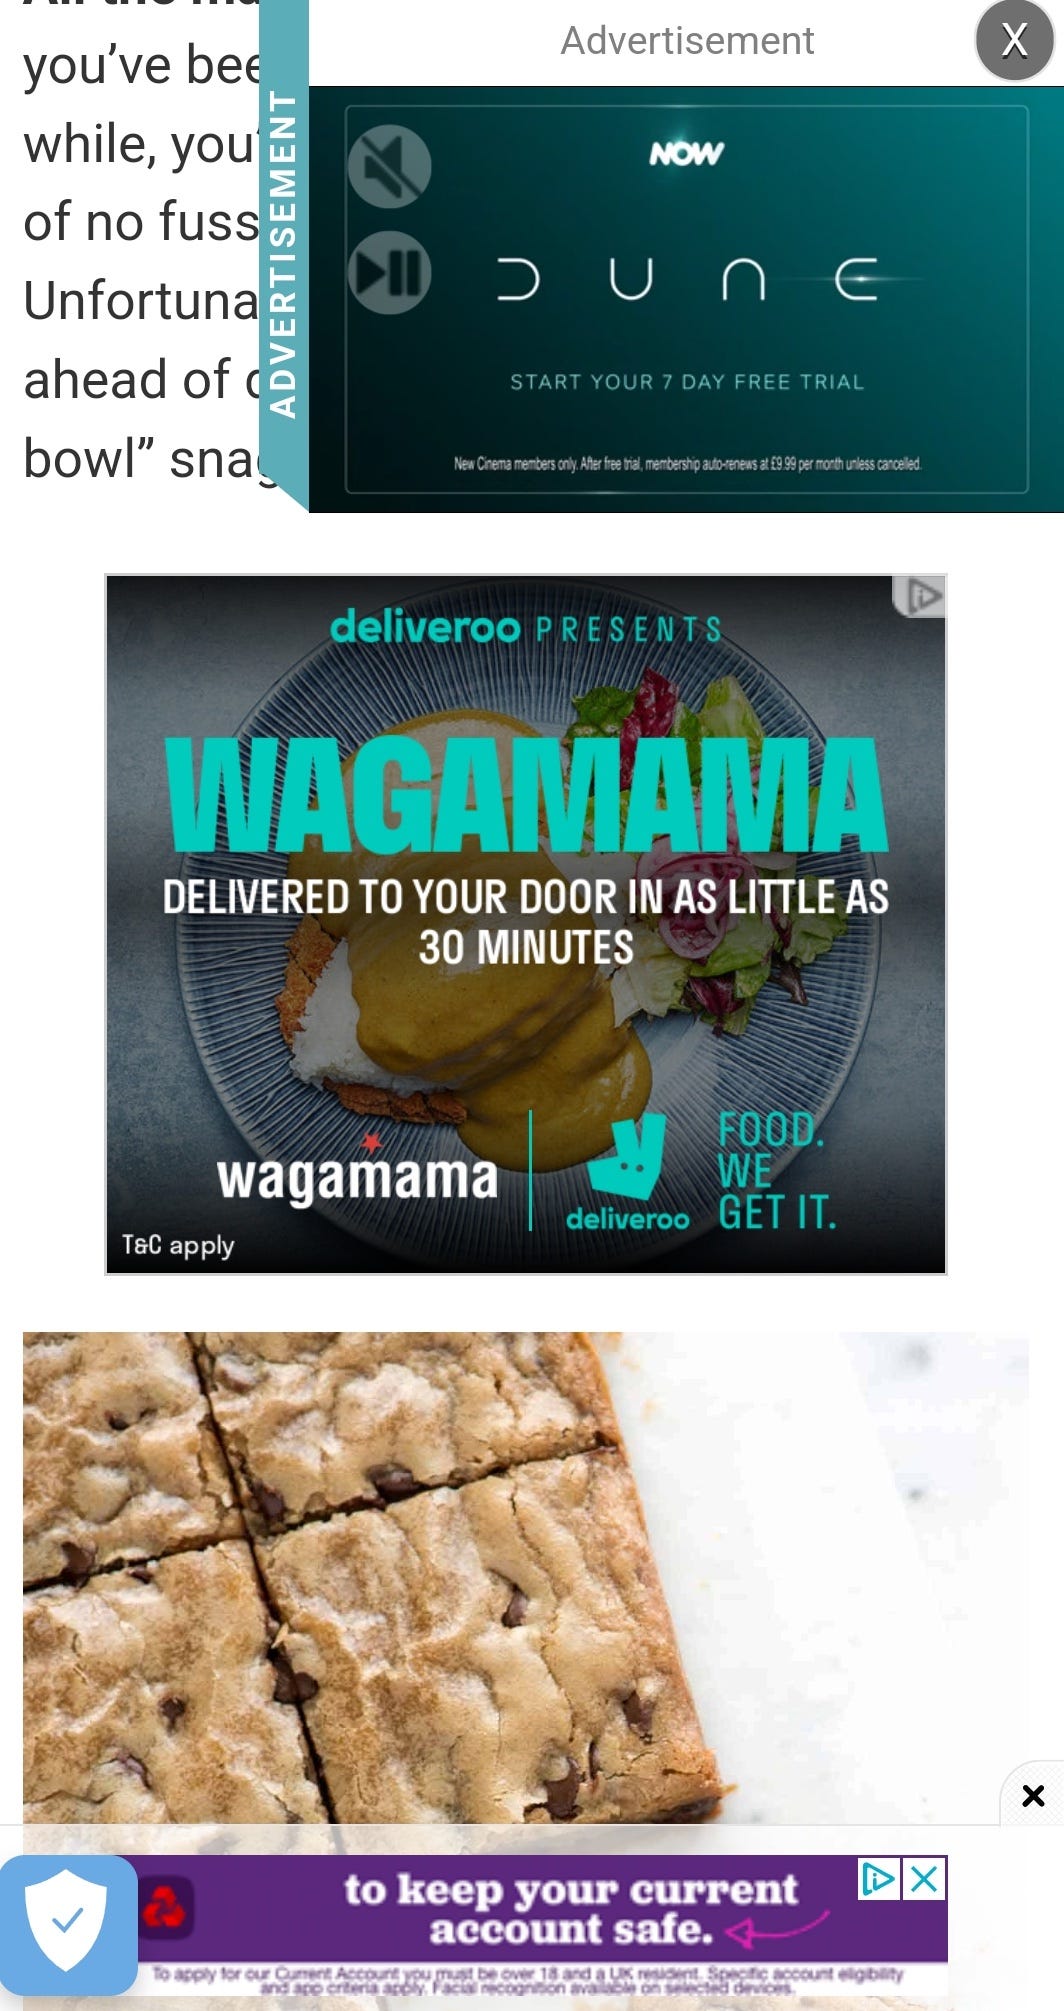 Recipe website leading to overstimulation: the screen is covered by adverts and videos that play automatically